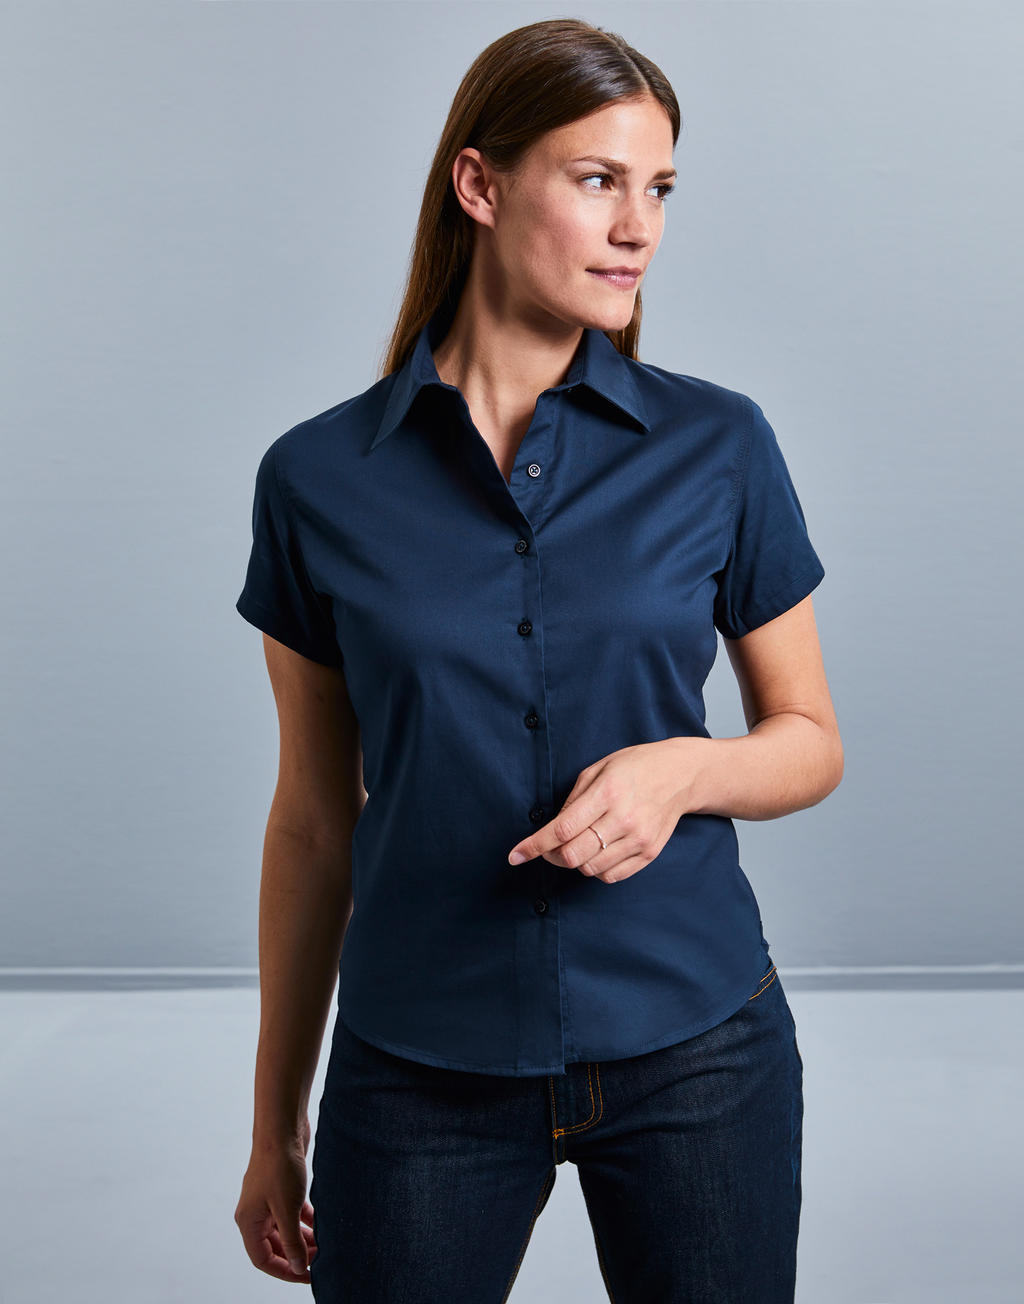  Ladies Classic Twill Shirt  in Farbe White